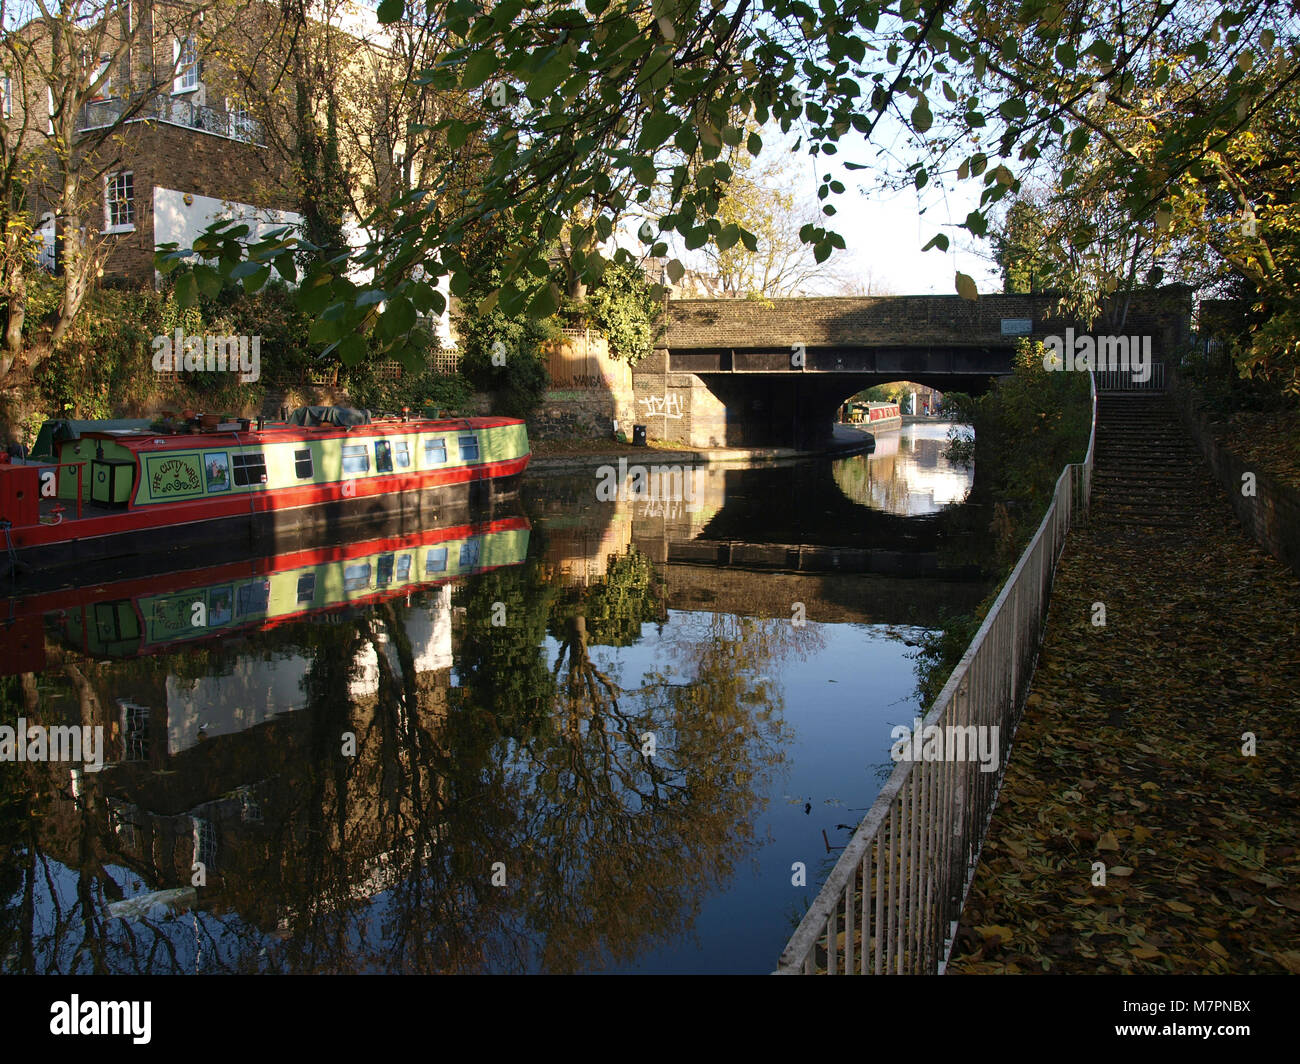 Reflections of a bridge, a barge and trees in the water of the Regents Park Canal in autumn Stock Photo